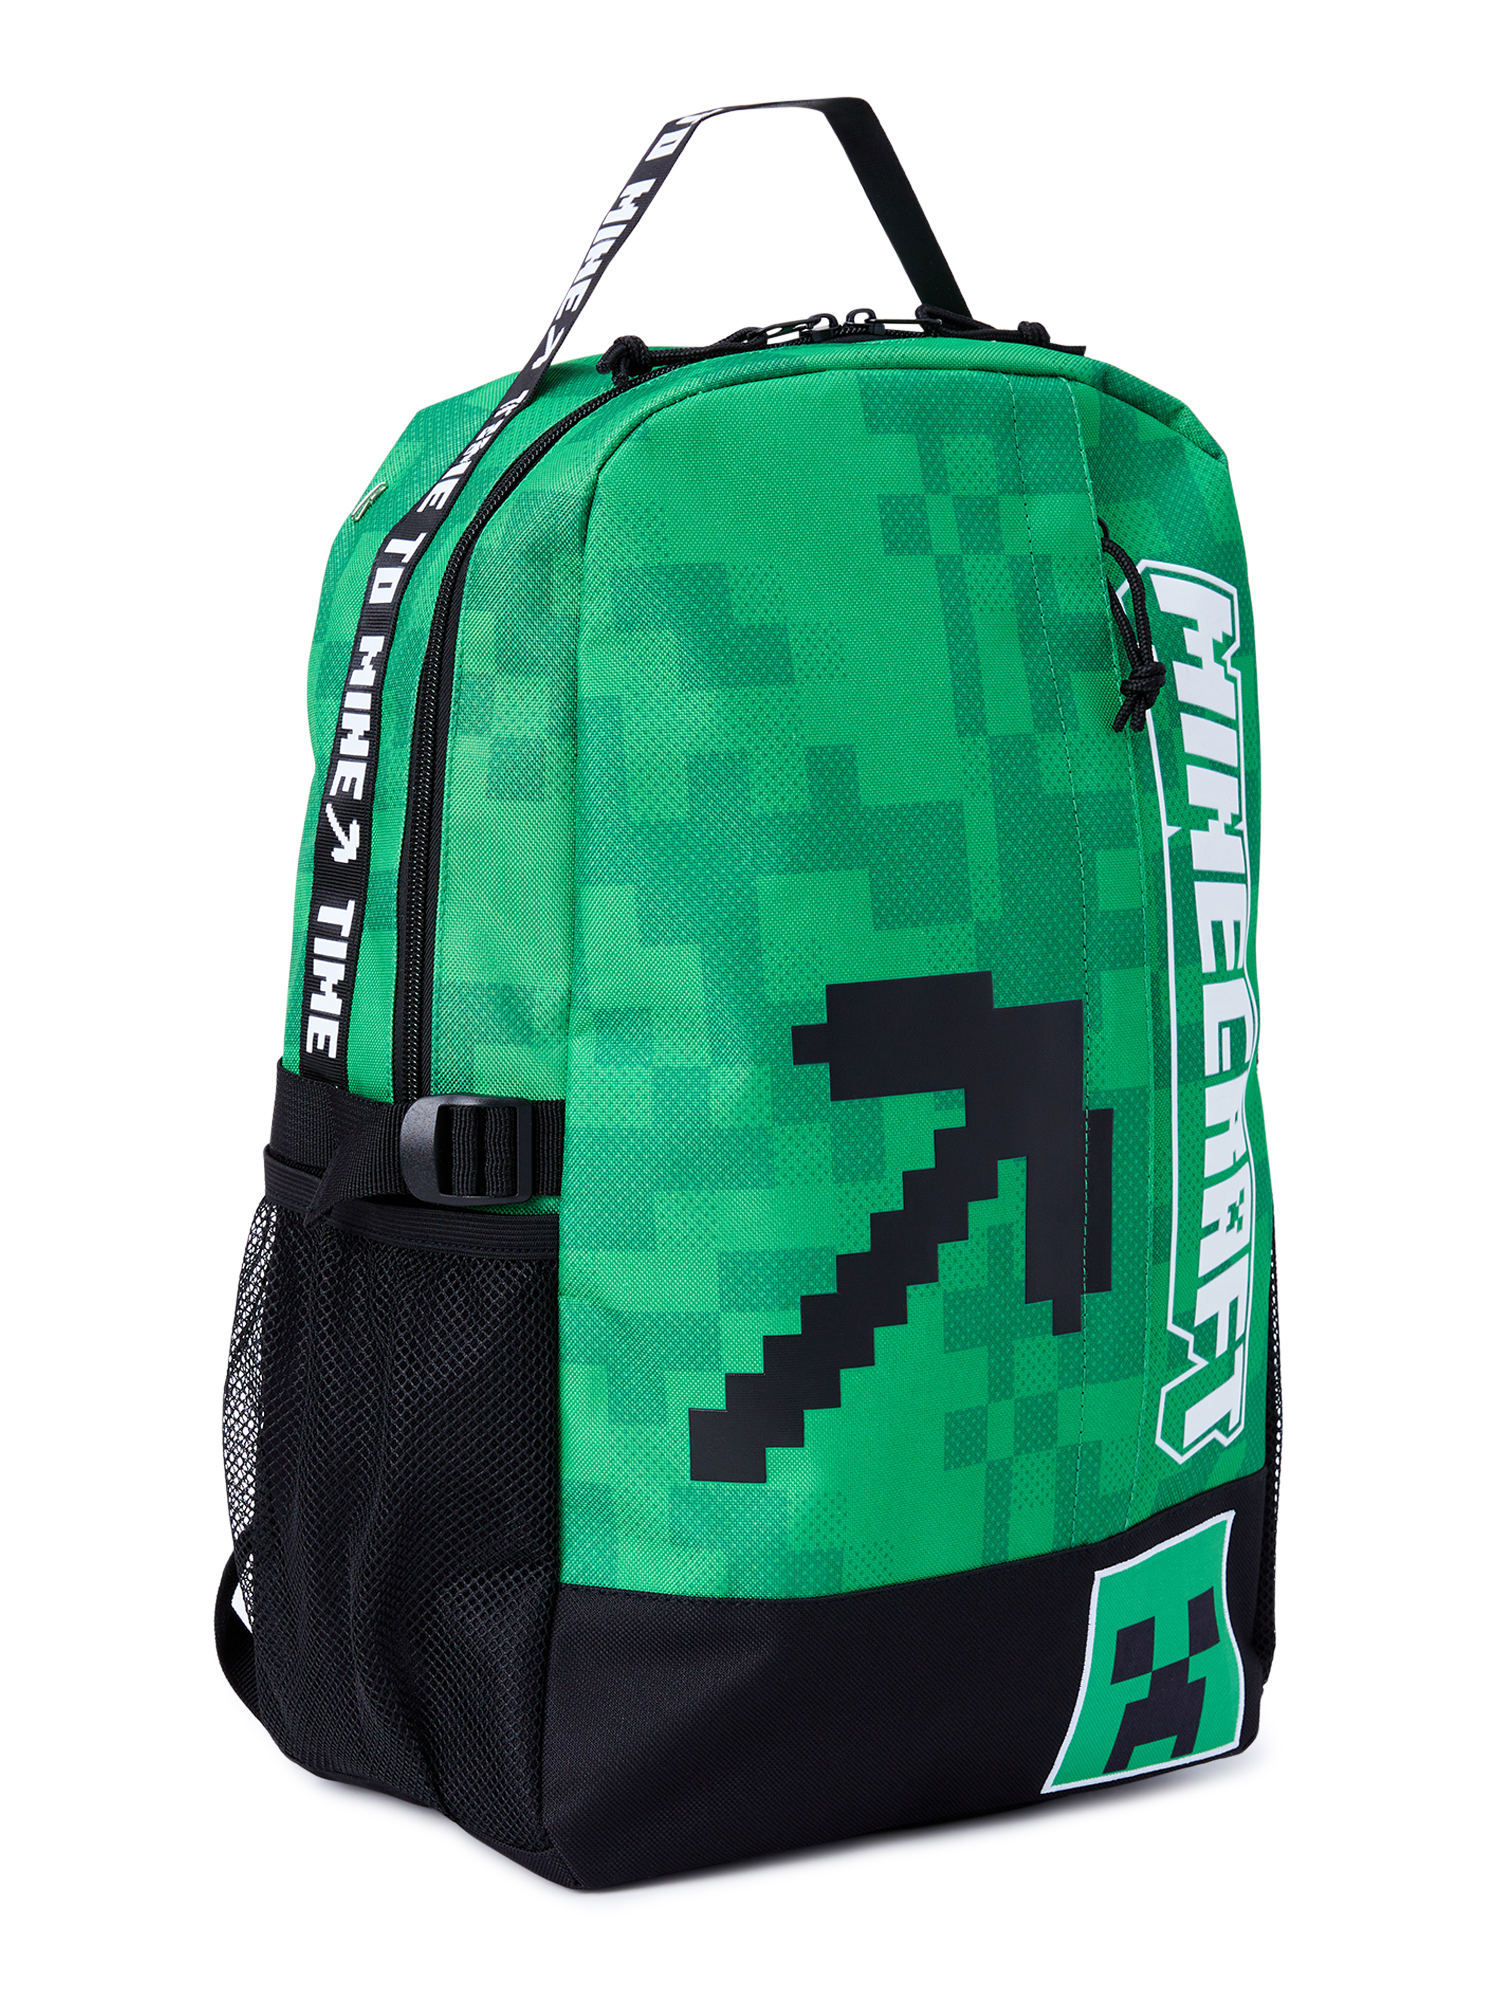 Minecraft Pickaxe Creeper Unisex 18" Laptop Backpack, Green Black - image 4 of 5